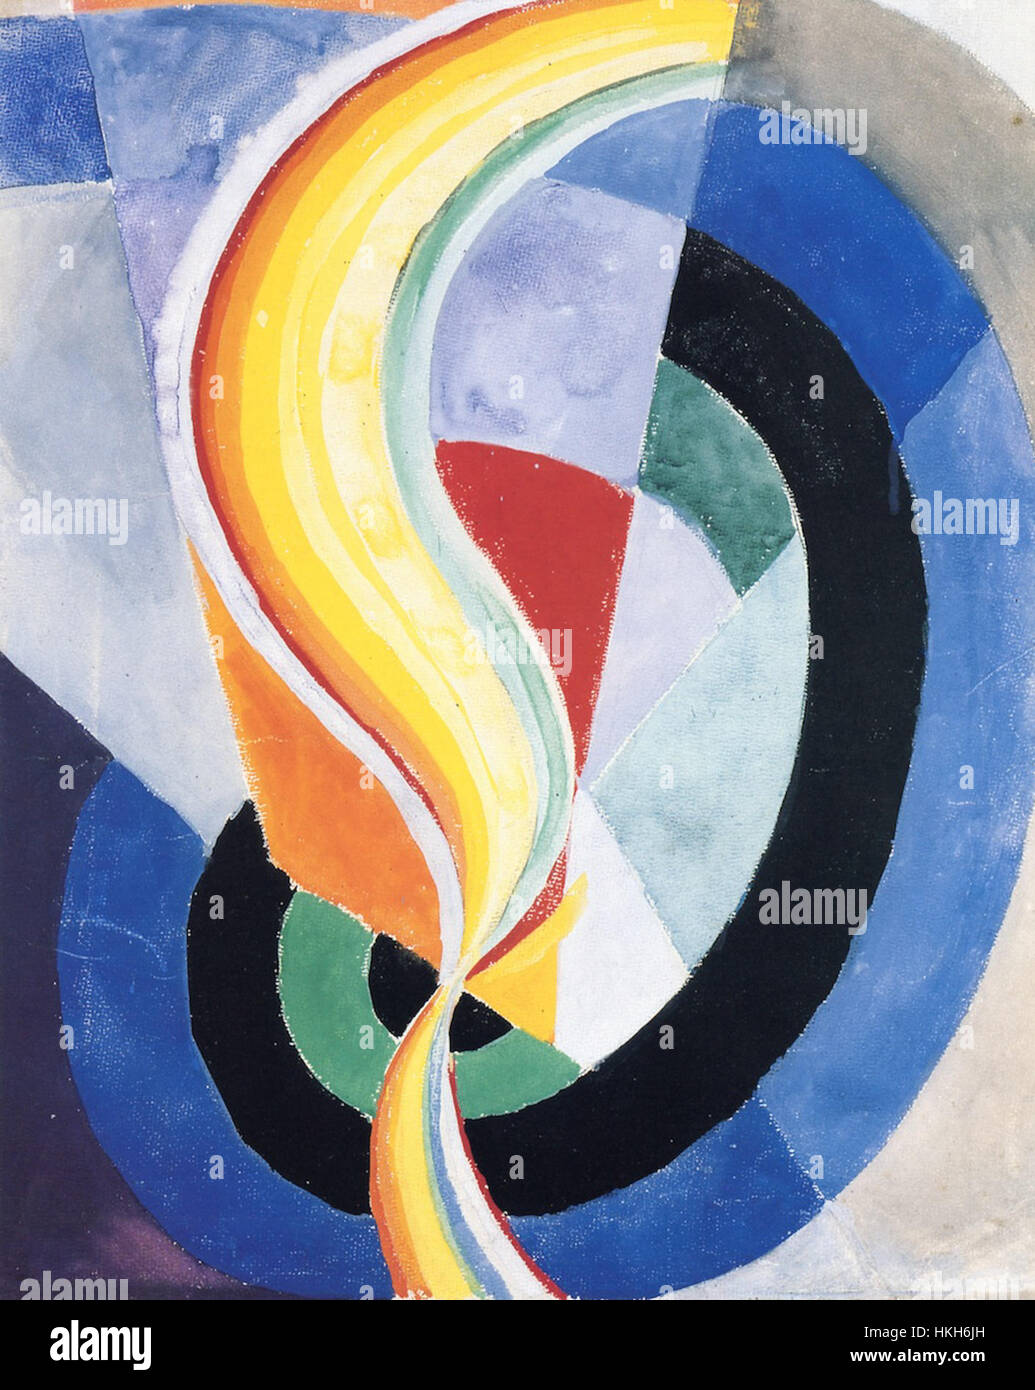 Robert Delaunay   Propeller   1923   Private collection Stock Photo